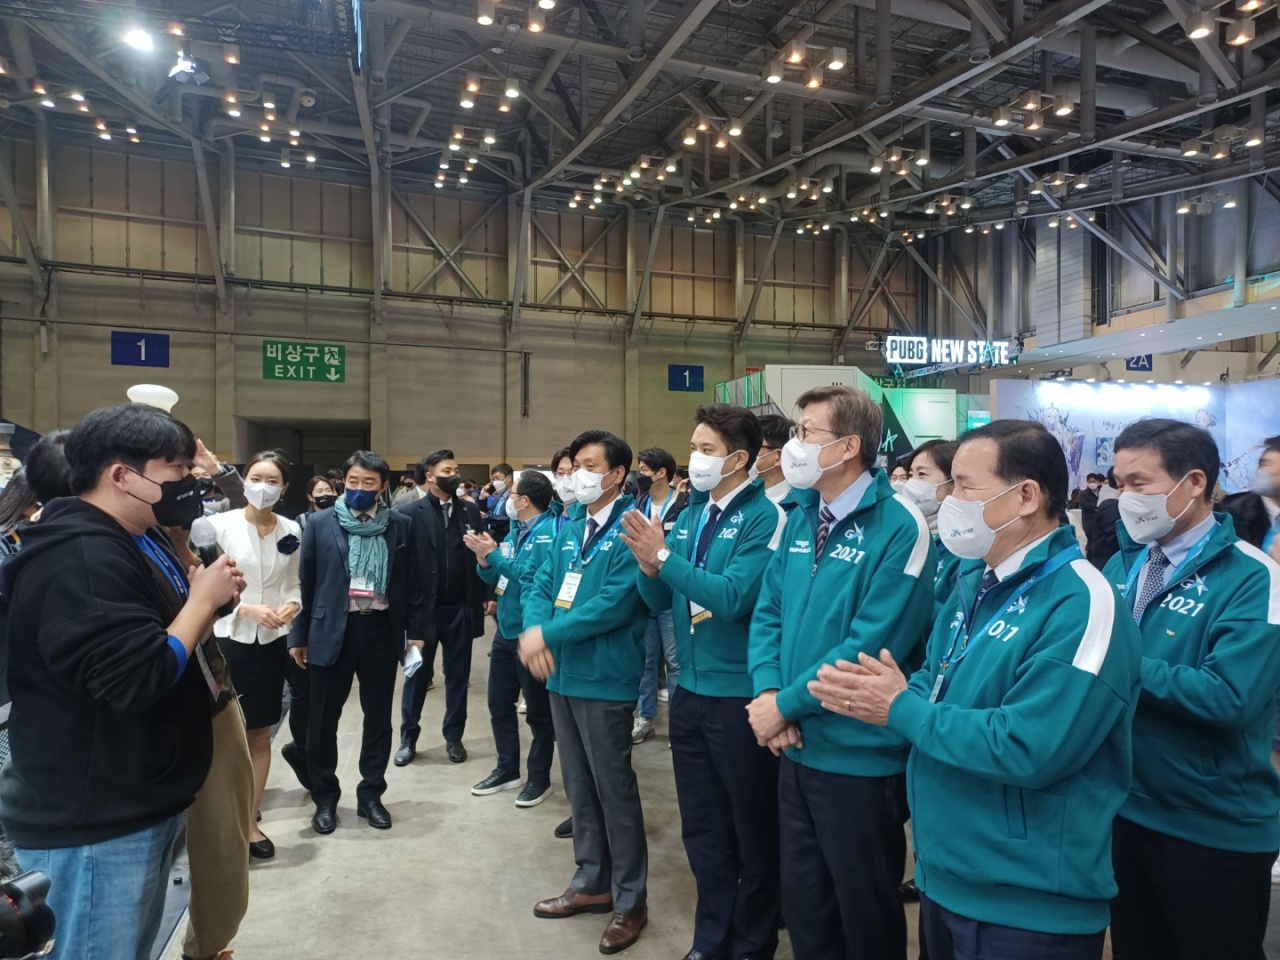 From left: Politicians Jo Seoung-lae, Jeon Yong-gi, Busan Mayor Park Hyeong-joon and Chairman of the Busan Metropolitan Council Shin Sang-hae, among others, listen to how the gaming booth and venues will operate at G-Star at the Bexco exhibition center in Busan. (Lee Si-jin/The Korea Herald)